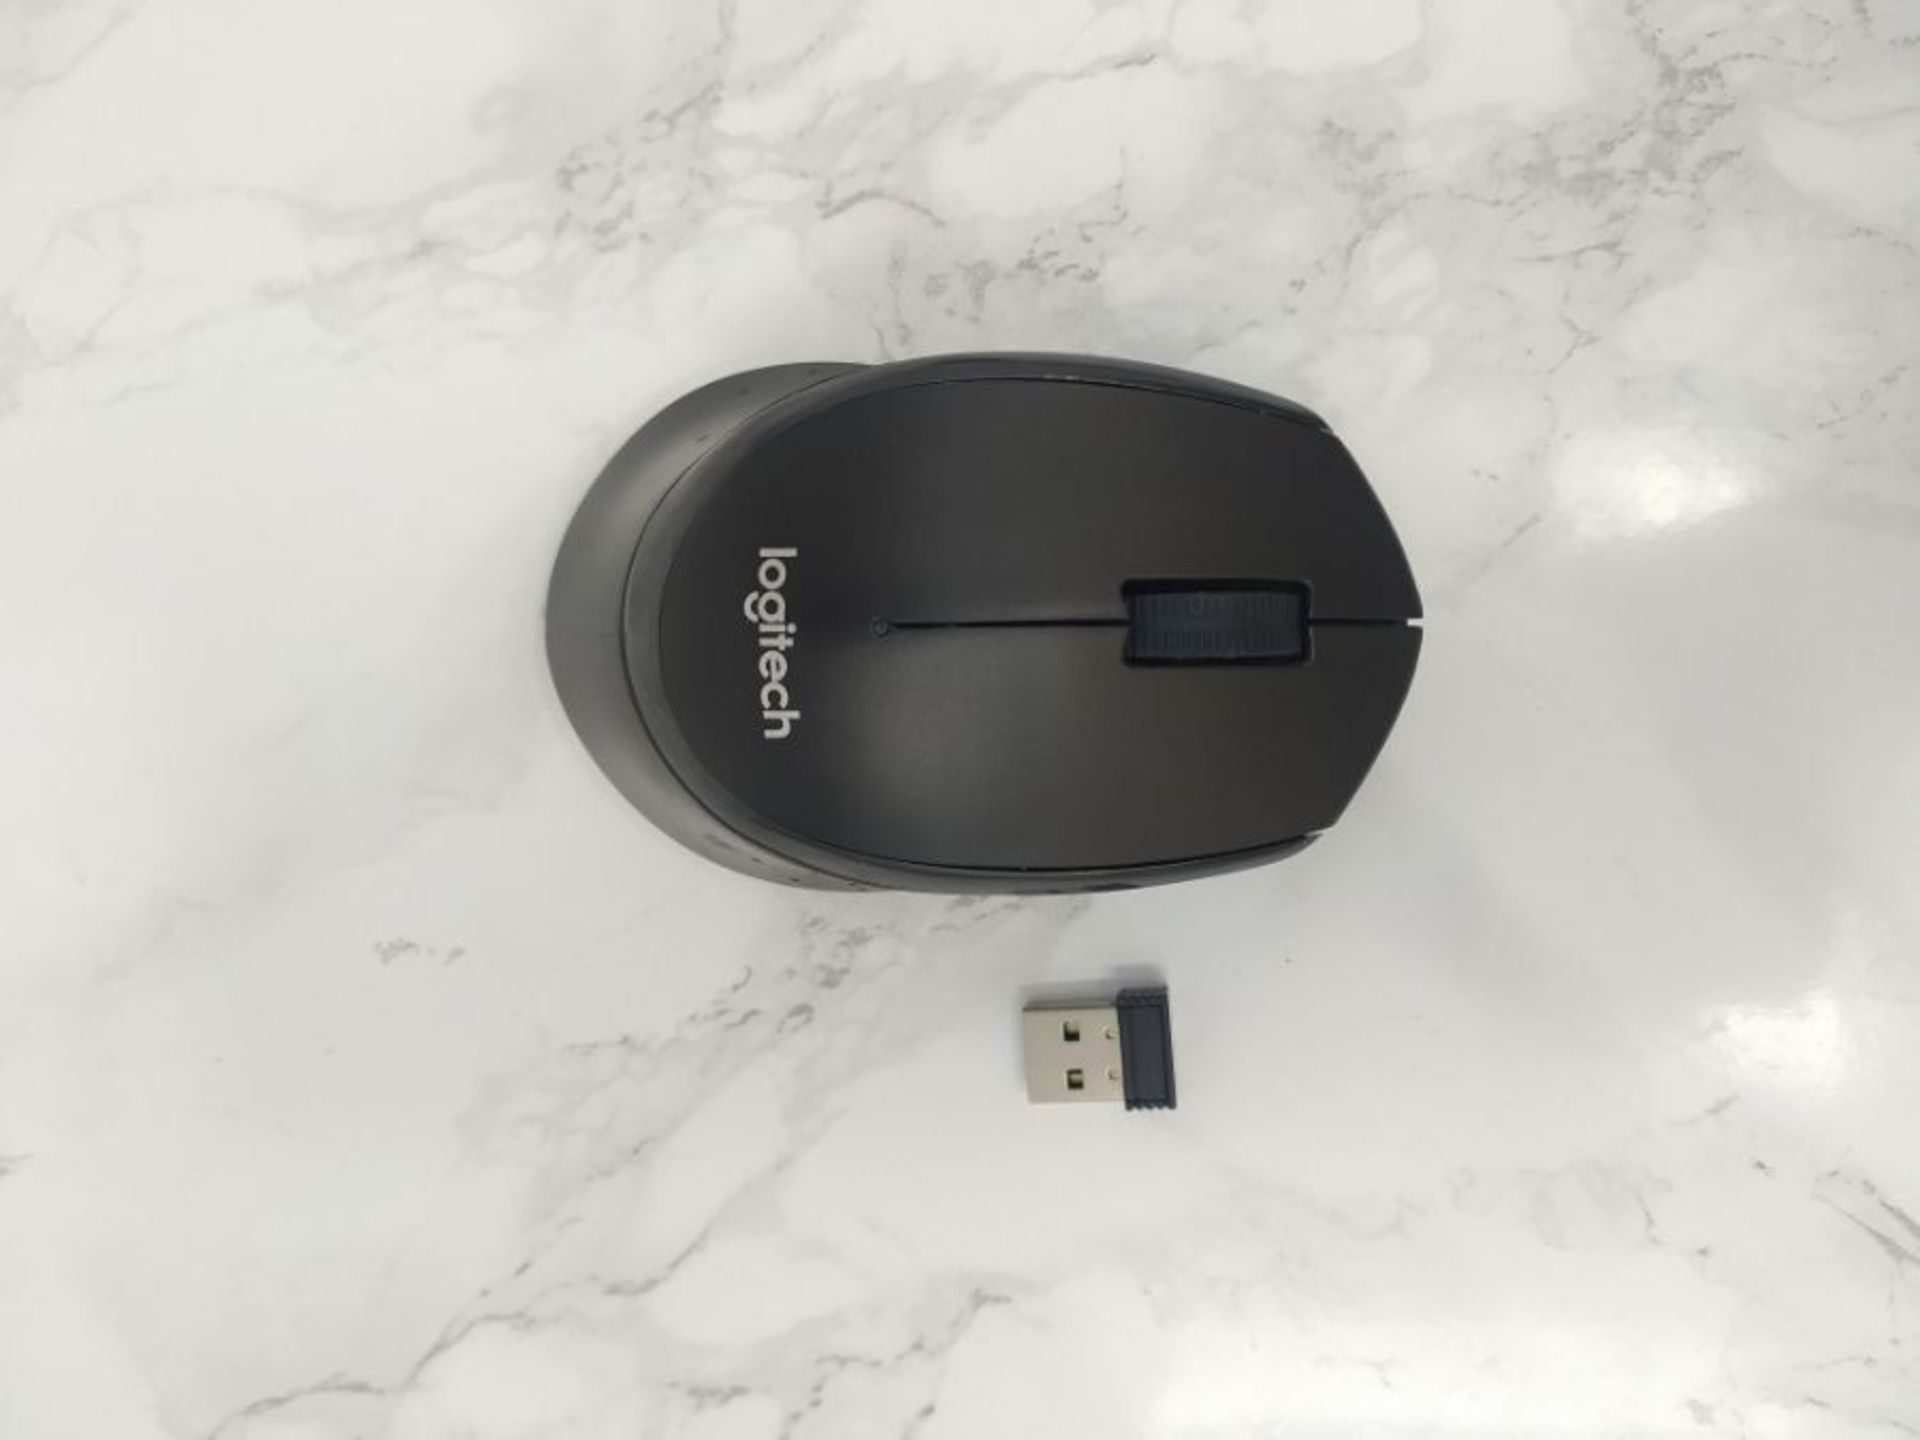 Logitech M330 Silent Plus Wireless Mouse, 2.4GHz with USB Nano Receiver, 1000 DPI Opti - Image 3 of 3